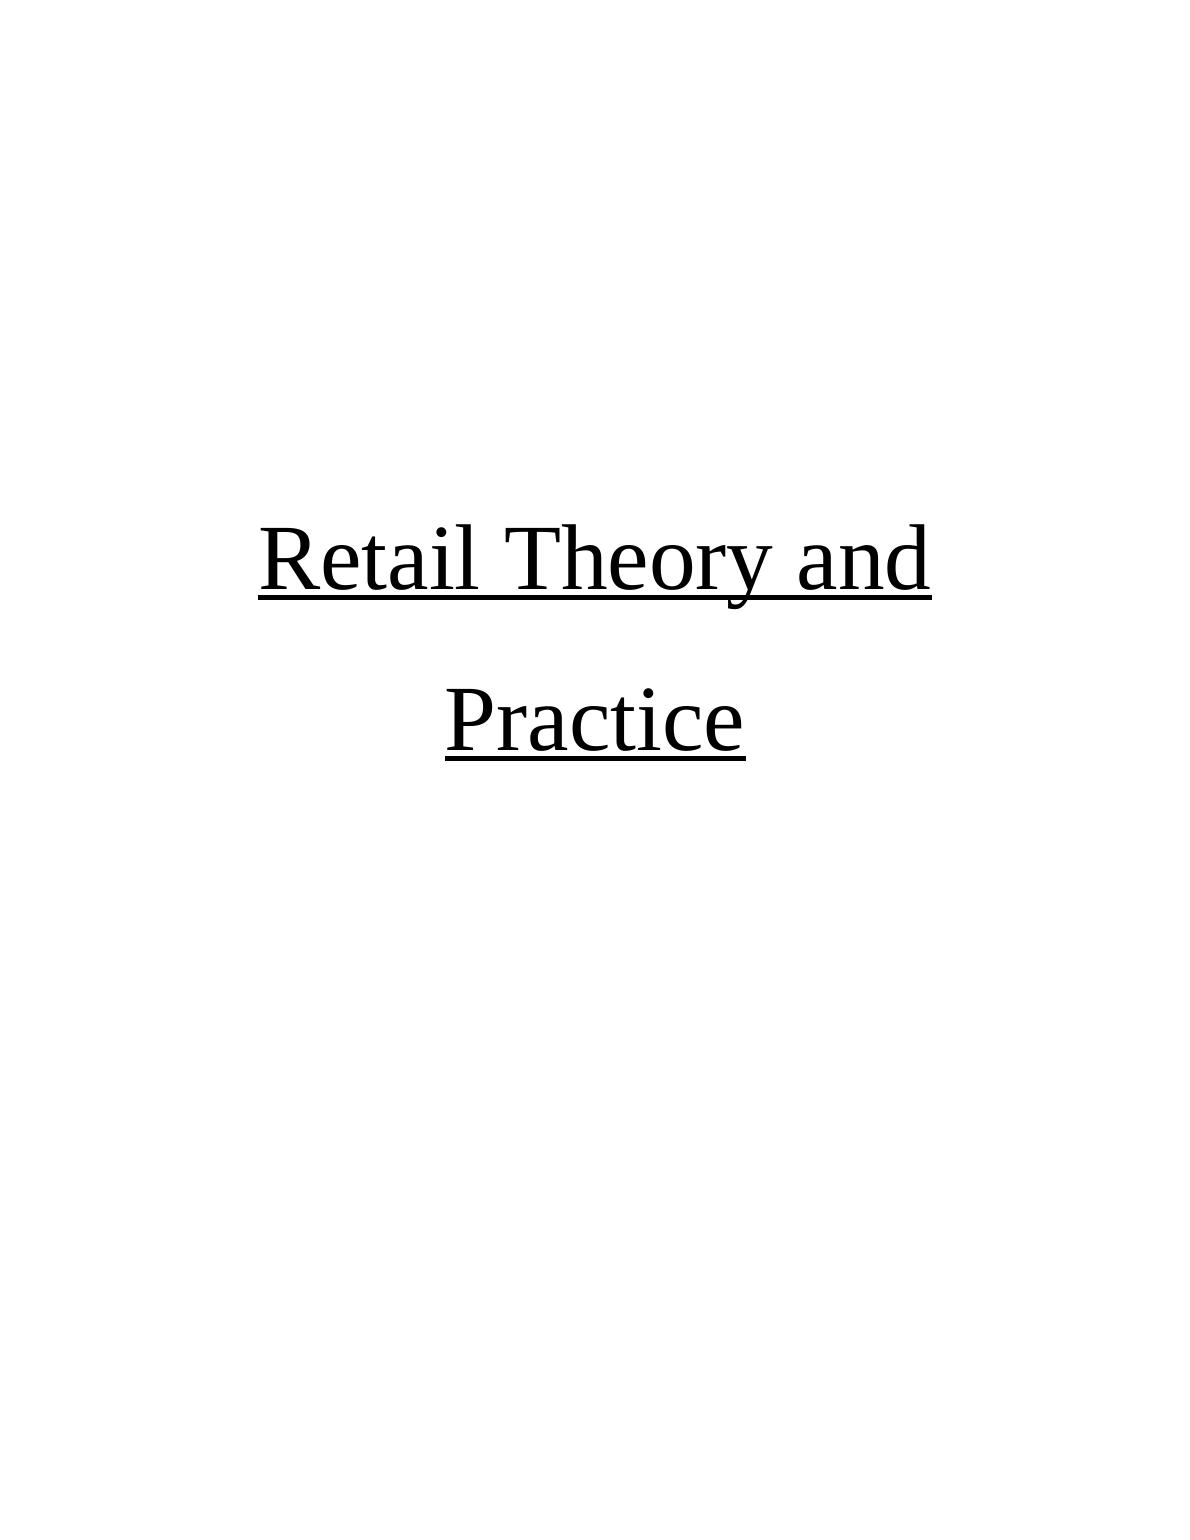 Retail Theory and Practice in UK Assignment_1